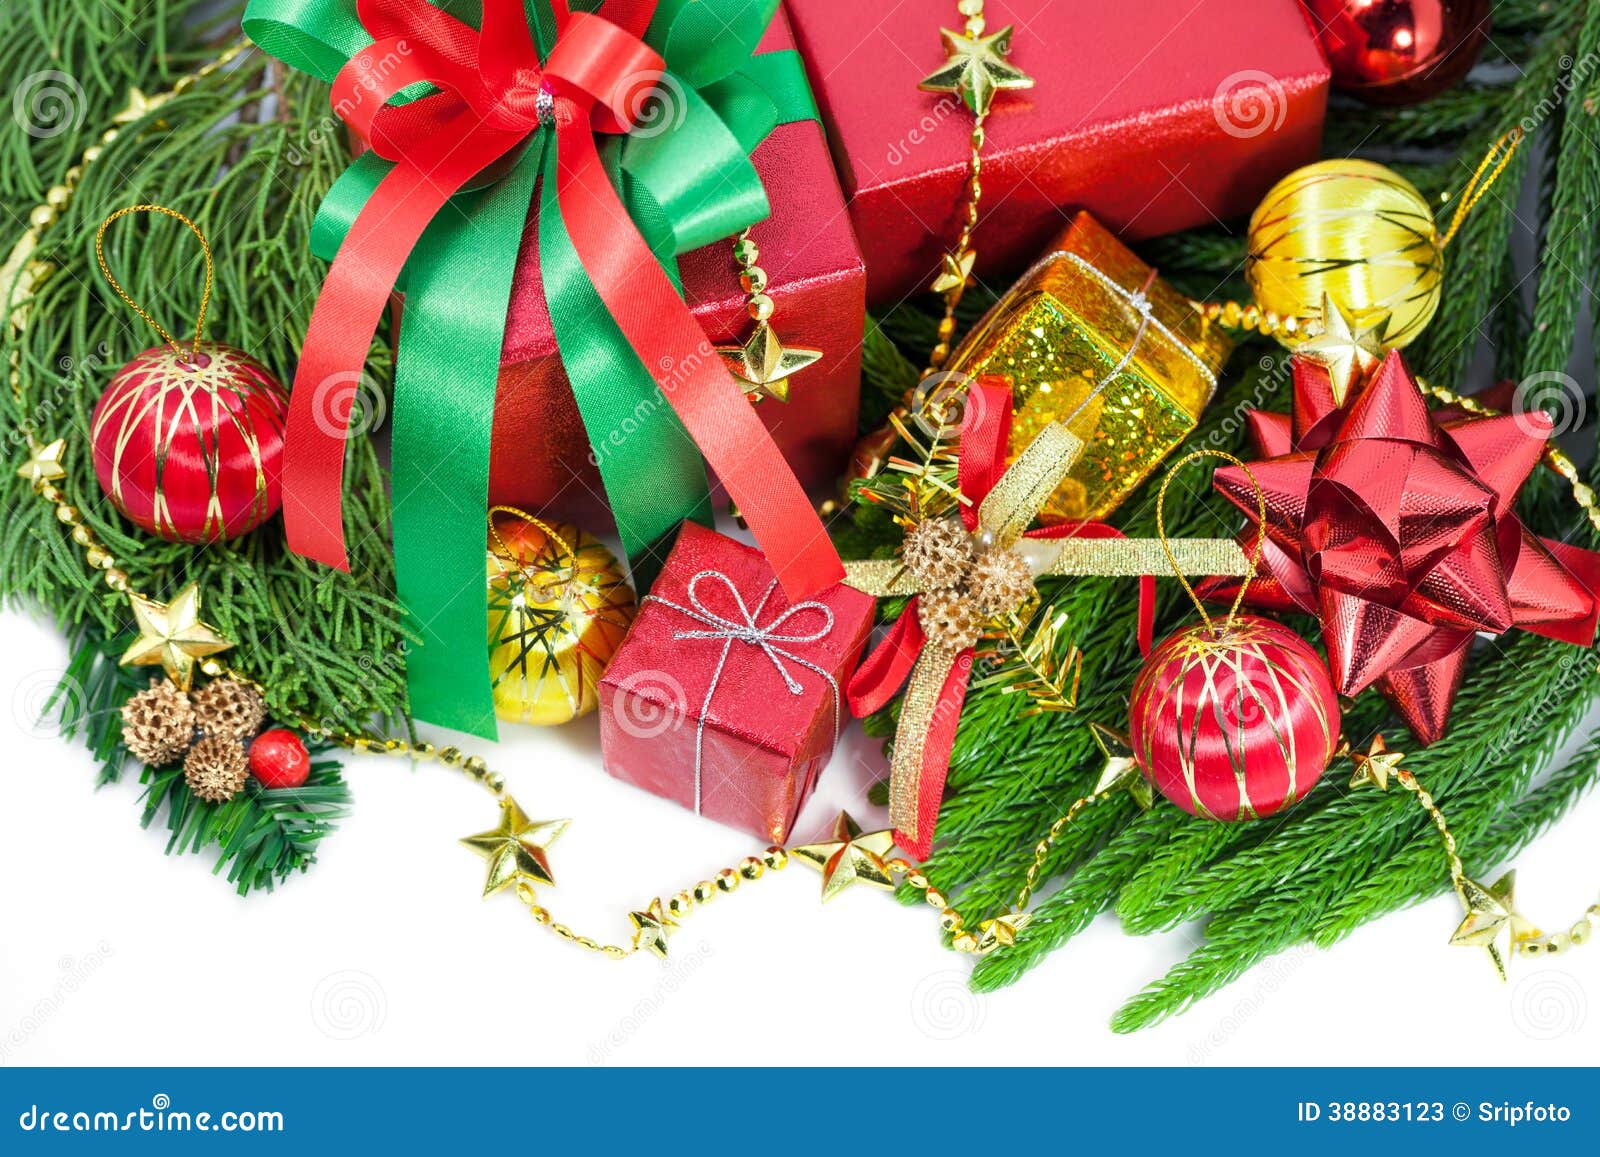 Christmas And Happy New Year Gift Boxes Decorations Stock Image - Image ...